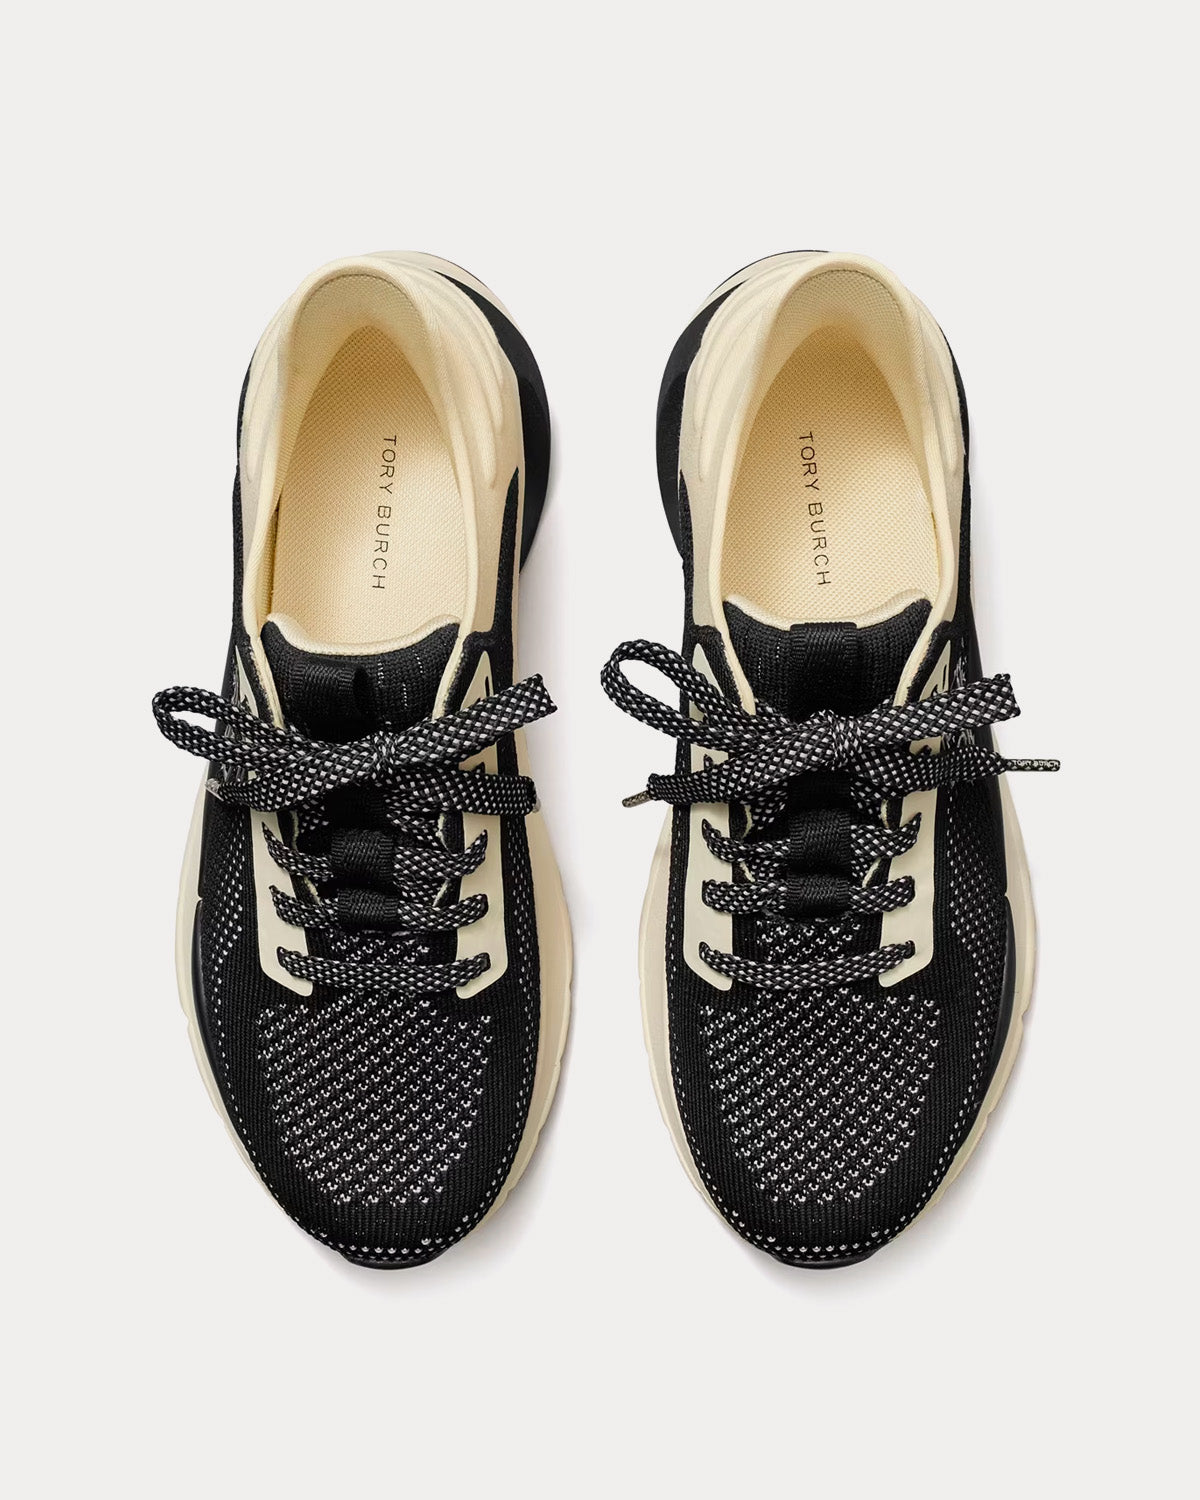 Tory Burch - Good Luck Knit Black / New Ivory Low Top Sneakers